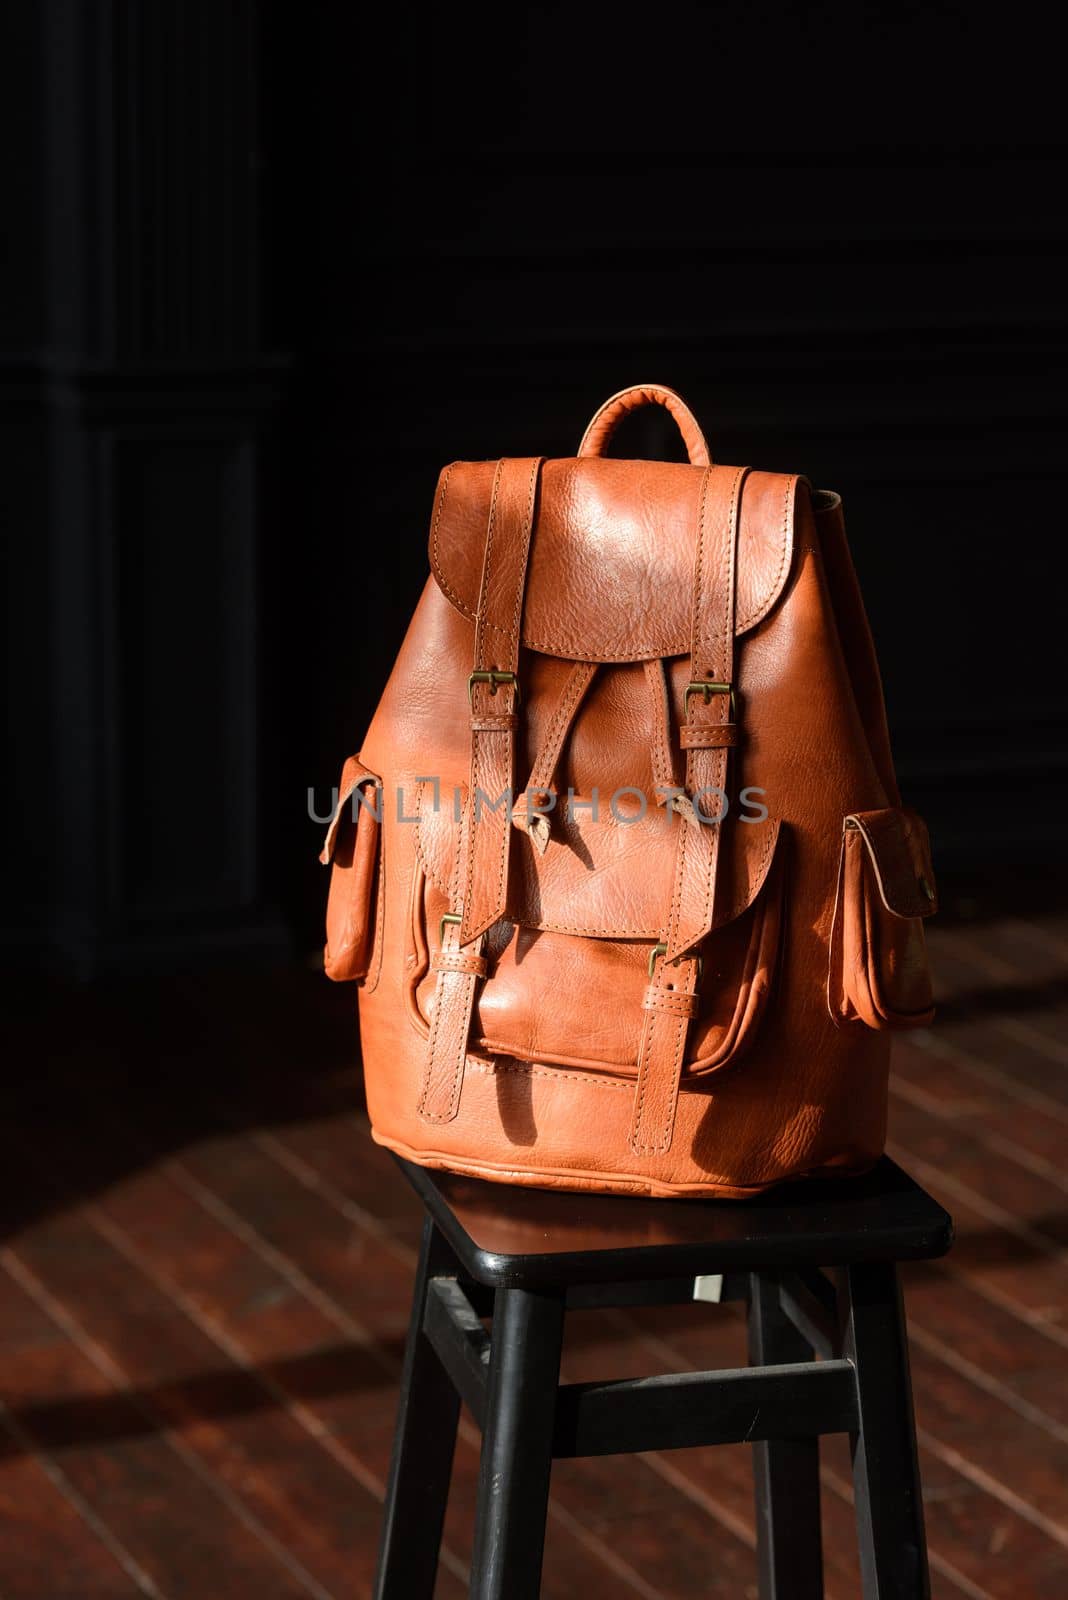 photo of a orange leather backpack with antique and retro look. indoors photo by Ashtray25